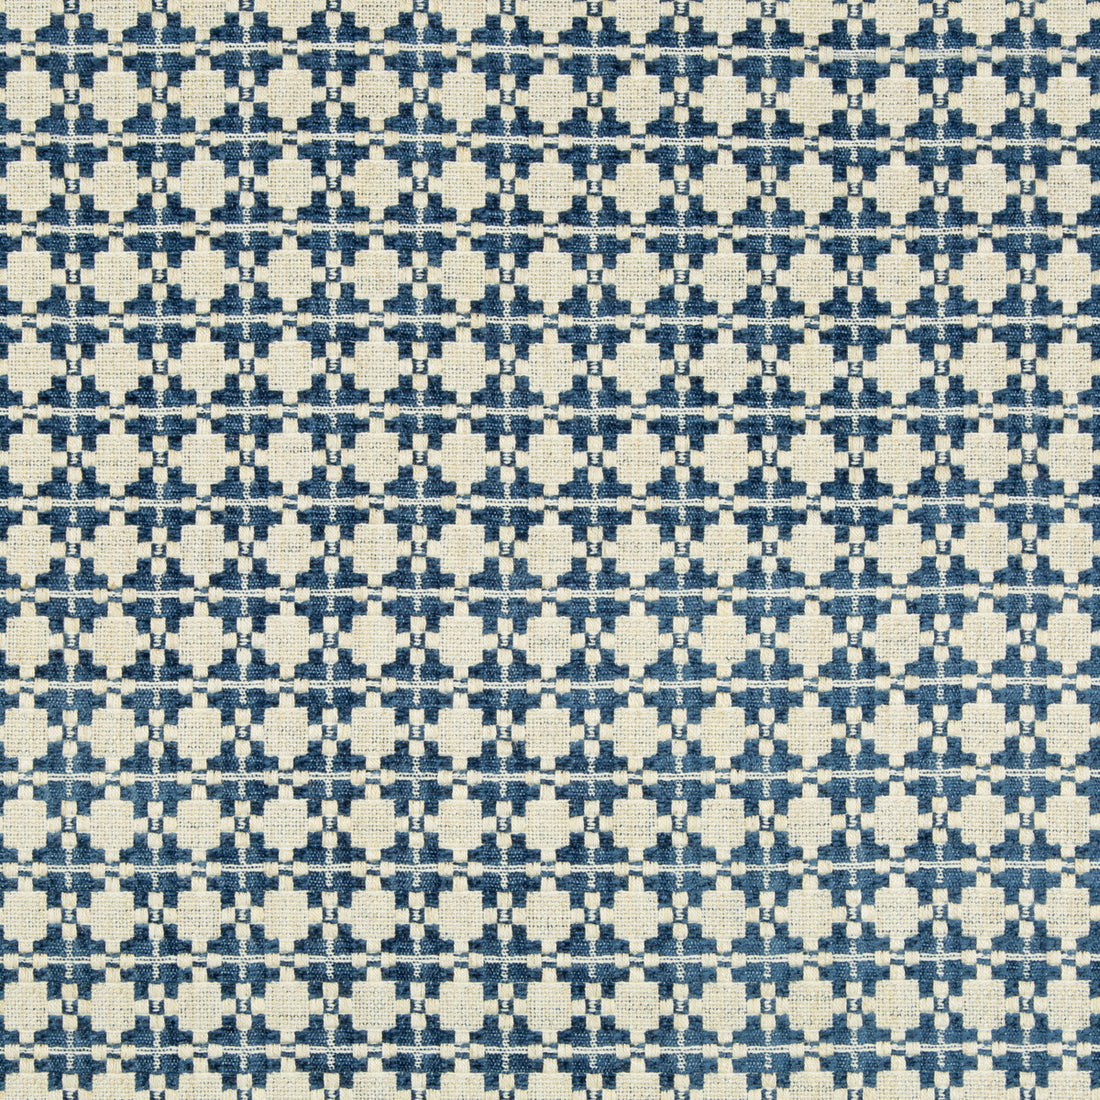 Back In Style fabric in capri color - pattern 34962.5.0 - by Kravet Couture in the Modern Tailor collection